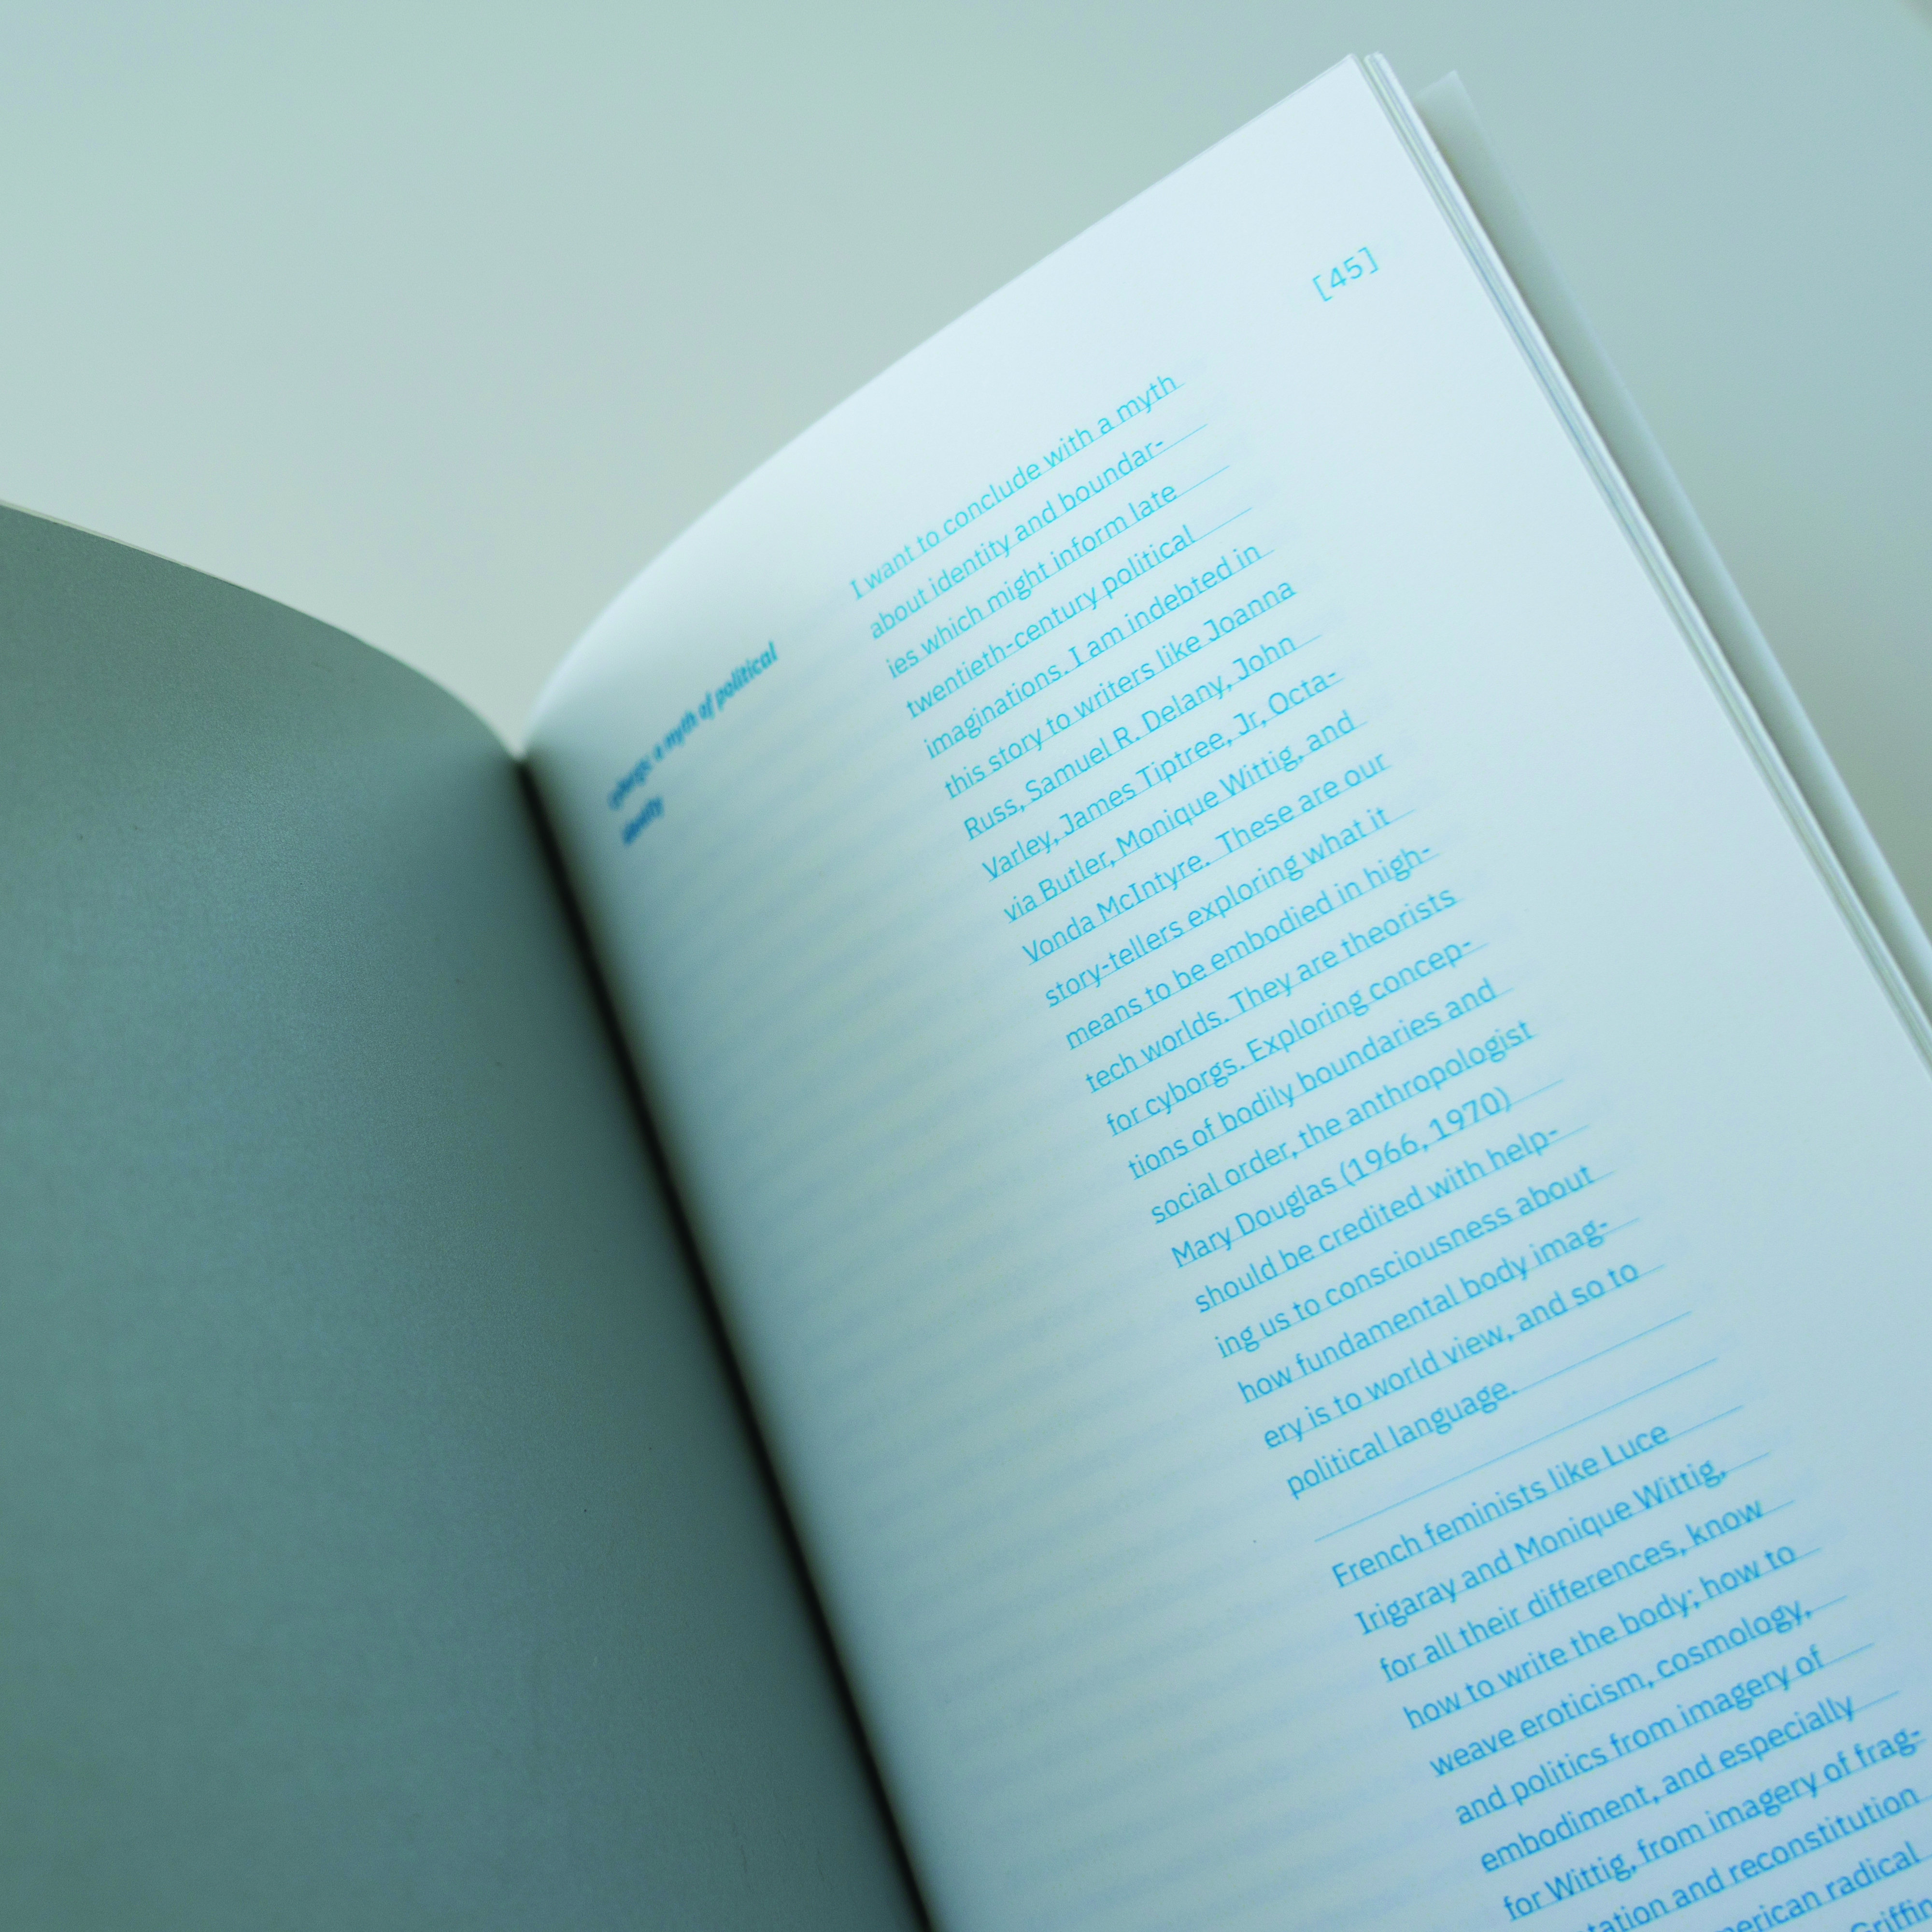 An opened book showing a white page with narrow columns of blue text and a diffused metallic page opposite it.